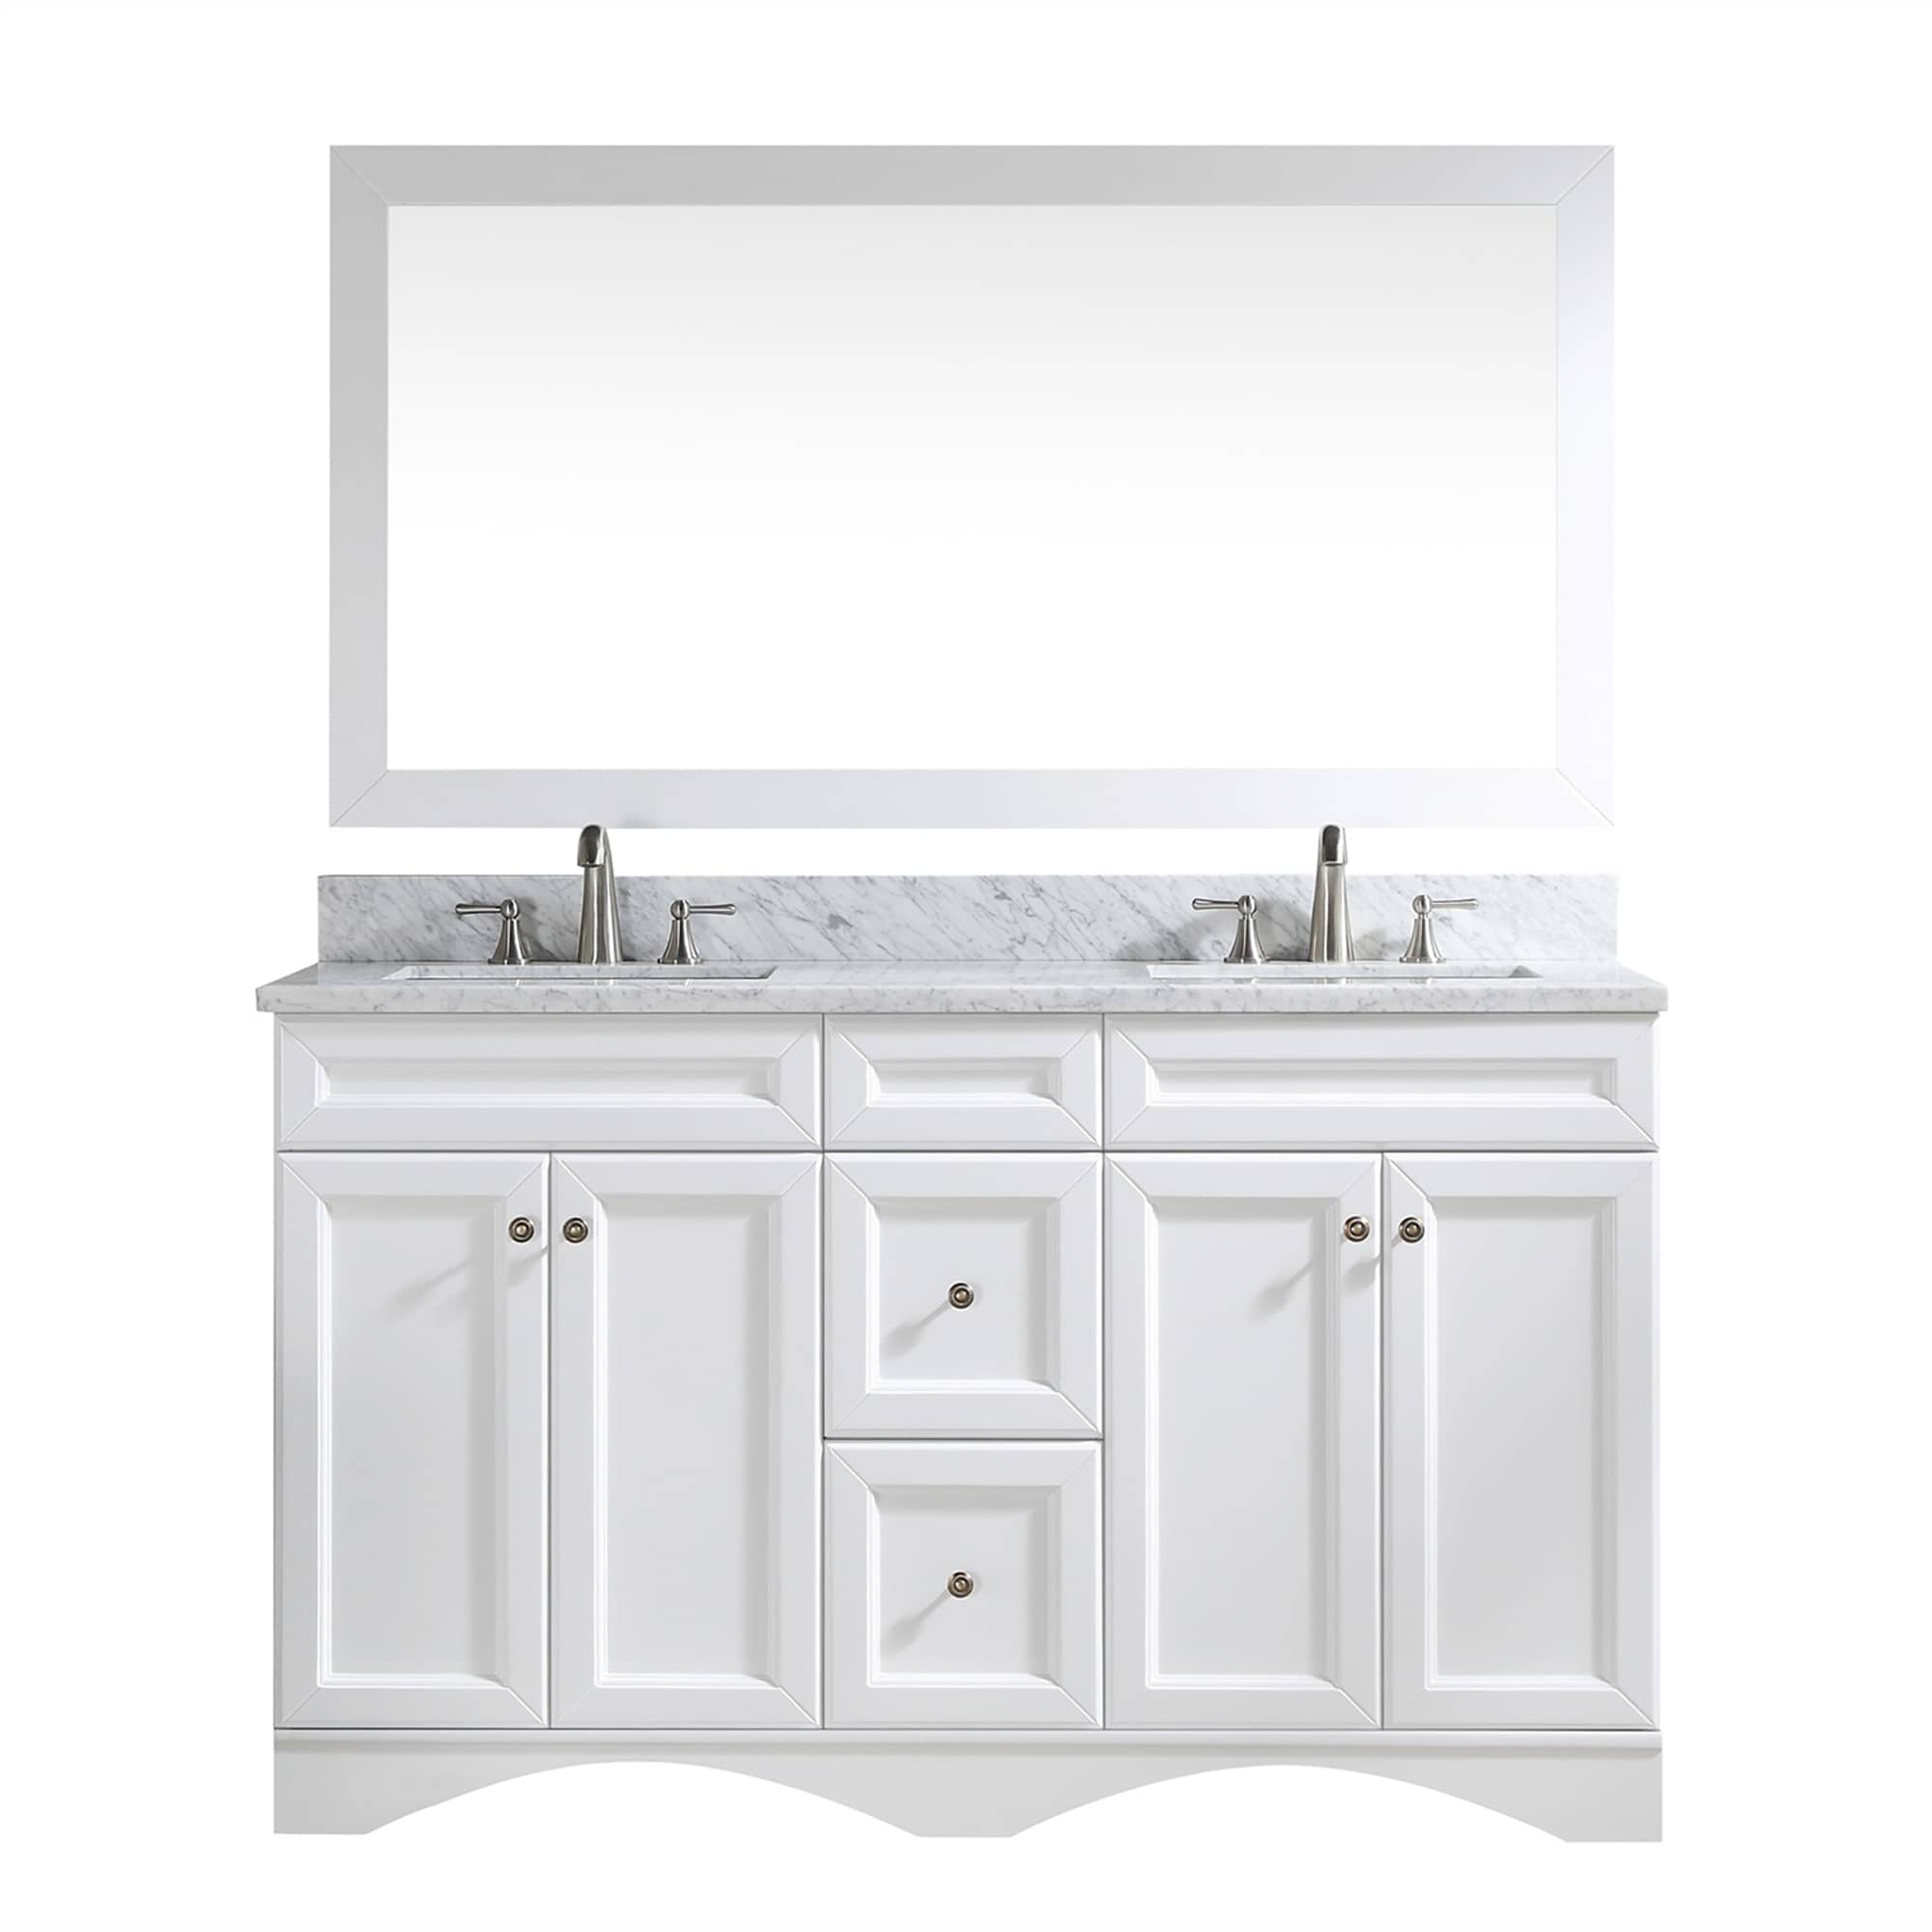 CASAINC 60 Inch Bath Vanity in White with White Top and Basin （60 W x 22D x 35.4“H ）-Casainc Canada